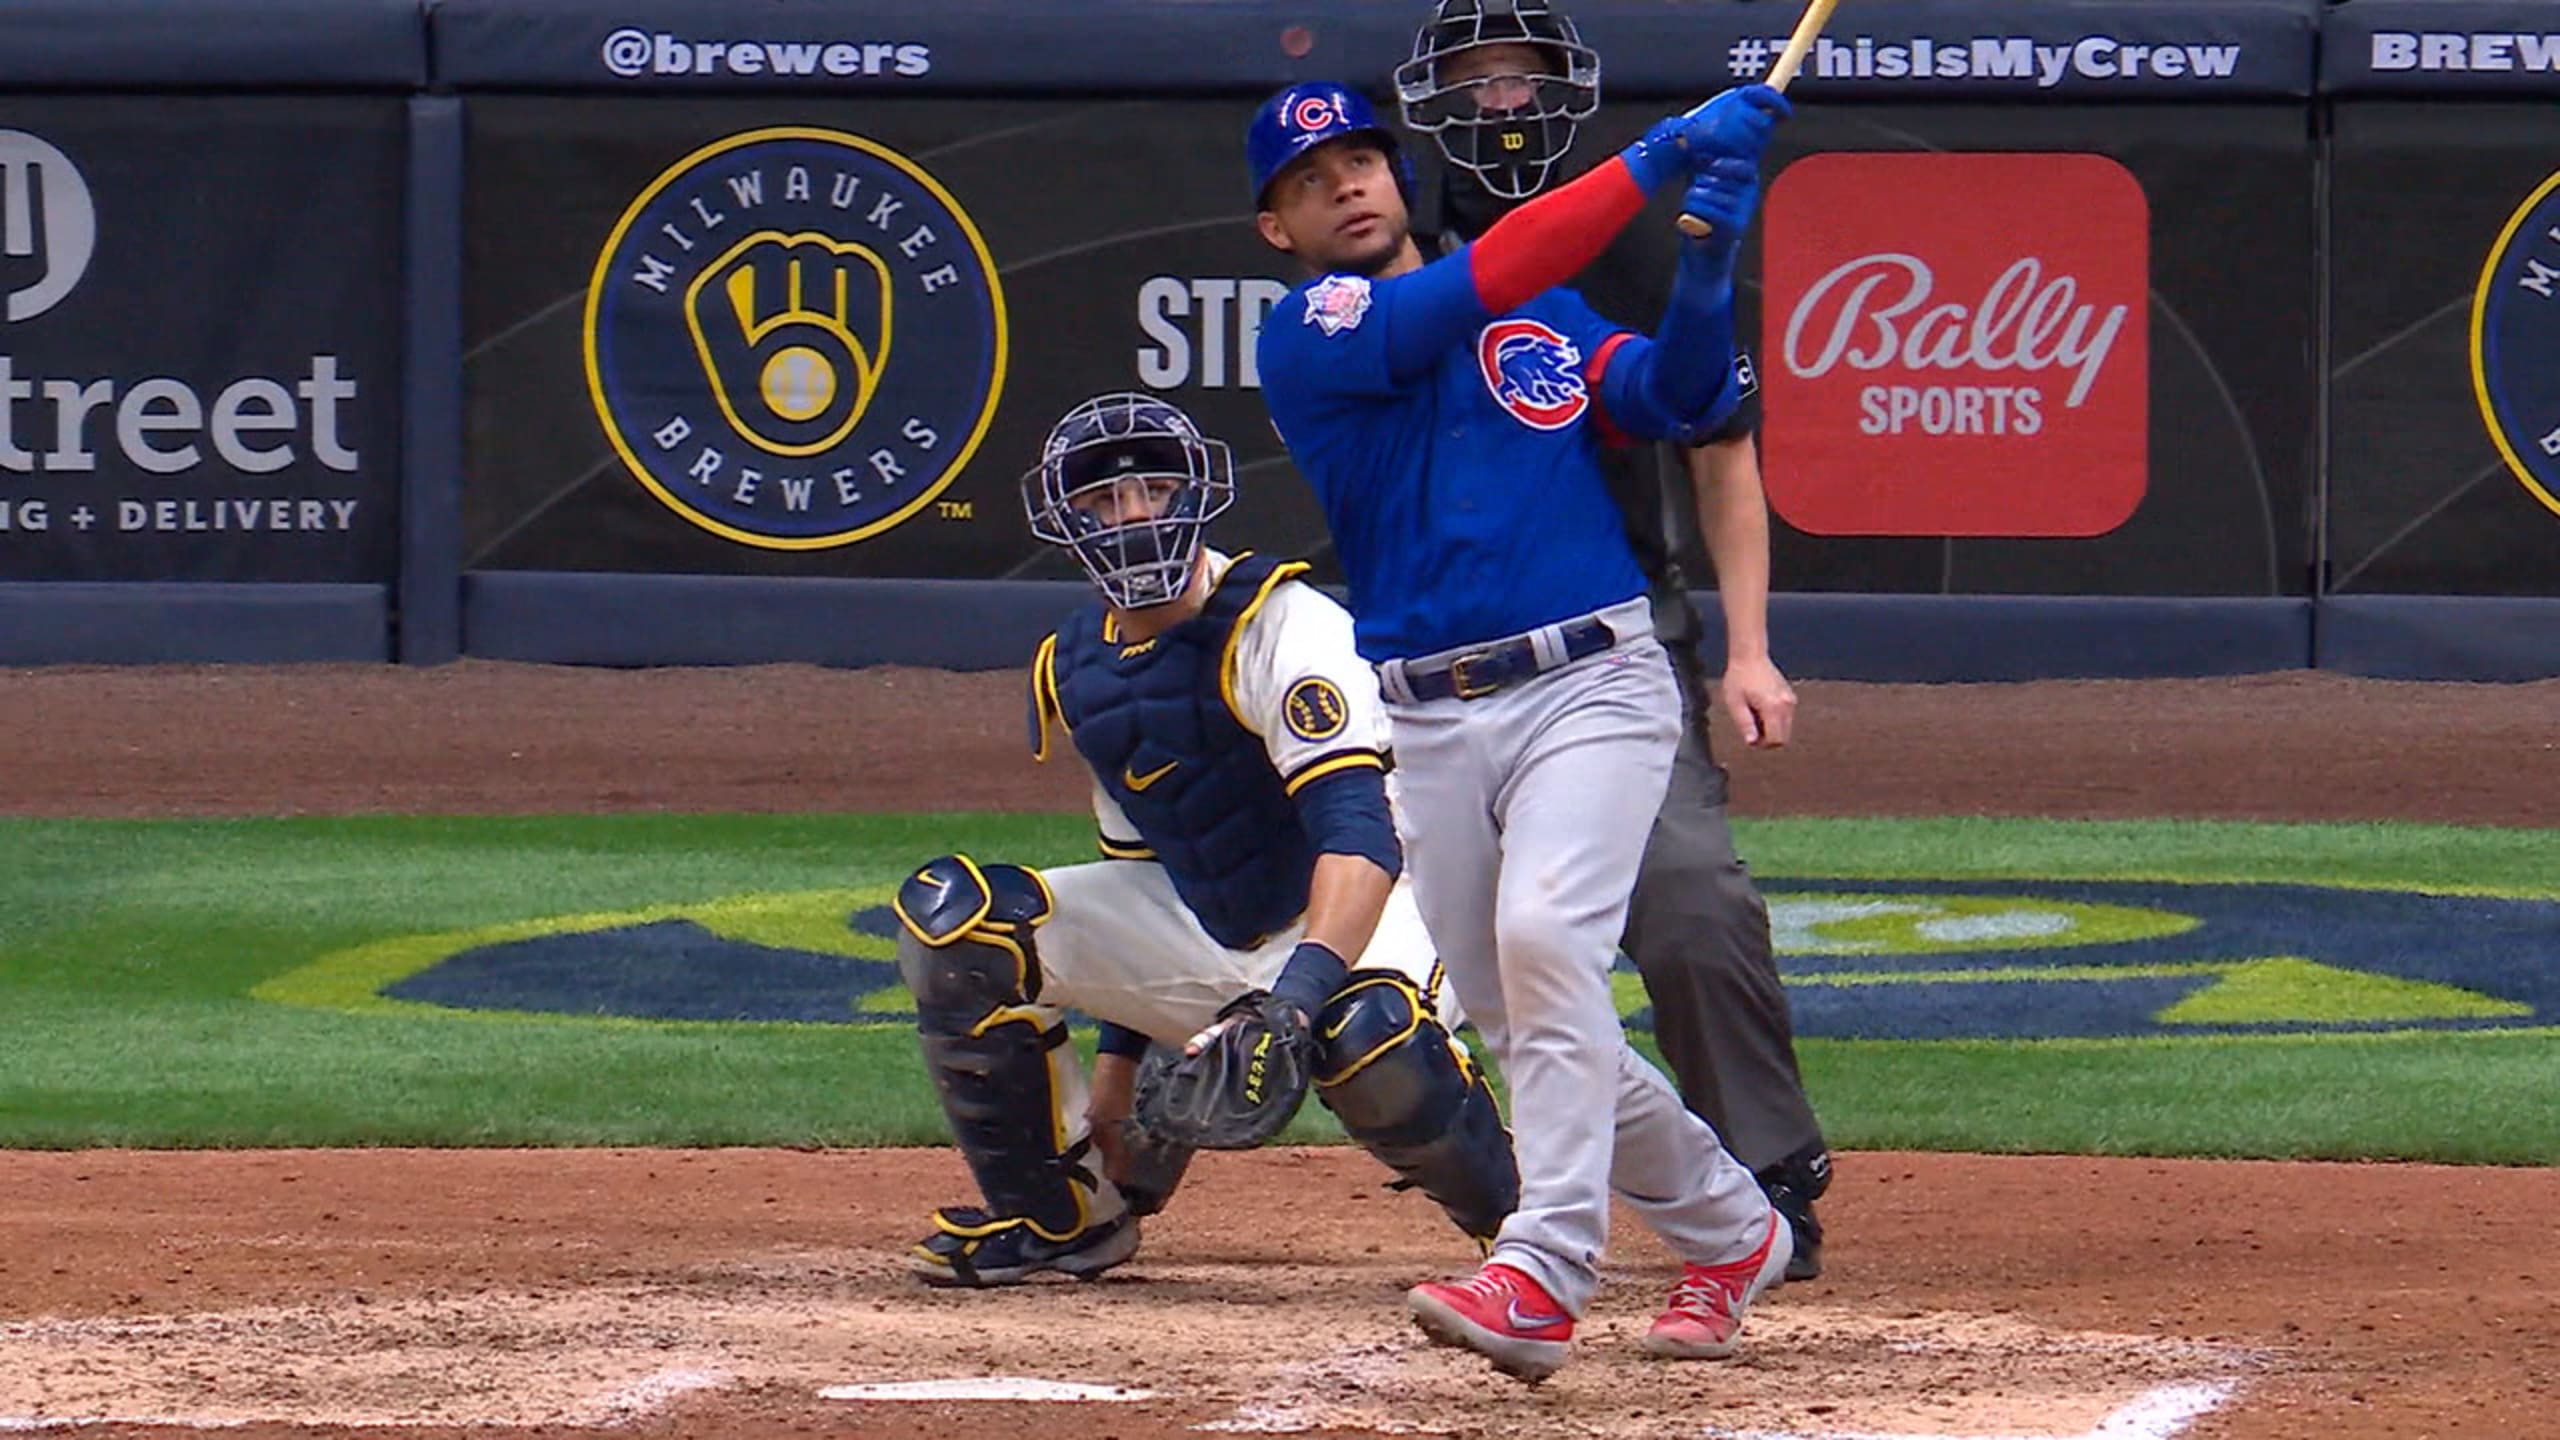 Cubs' Willson Contreras 'shushes' Brewers With Clutch Late Inning Homer